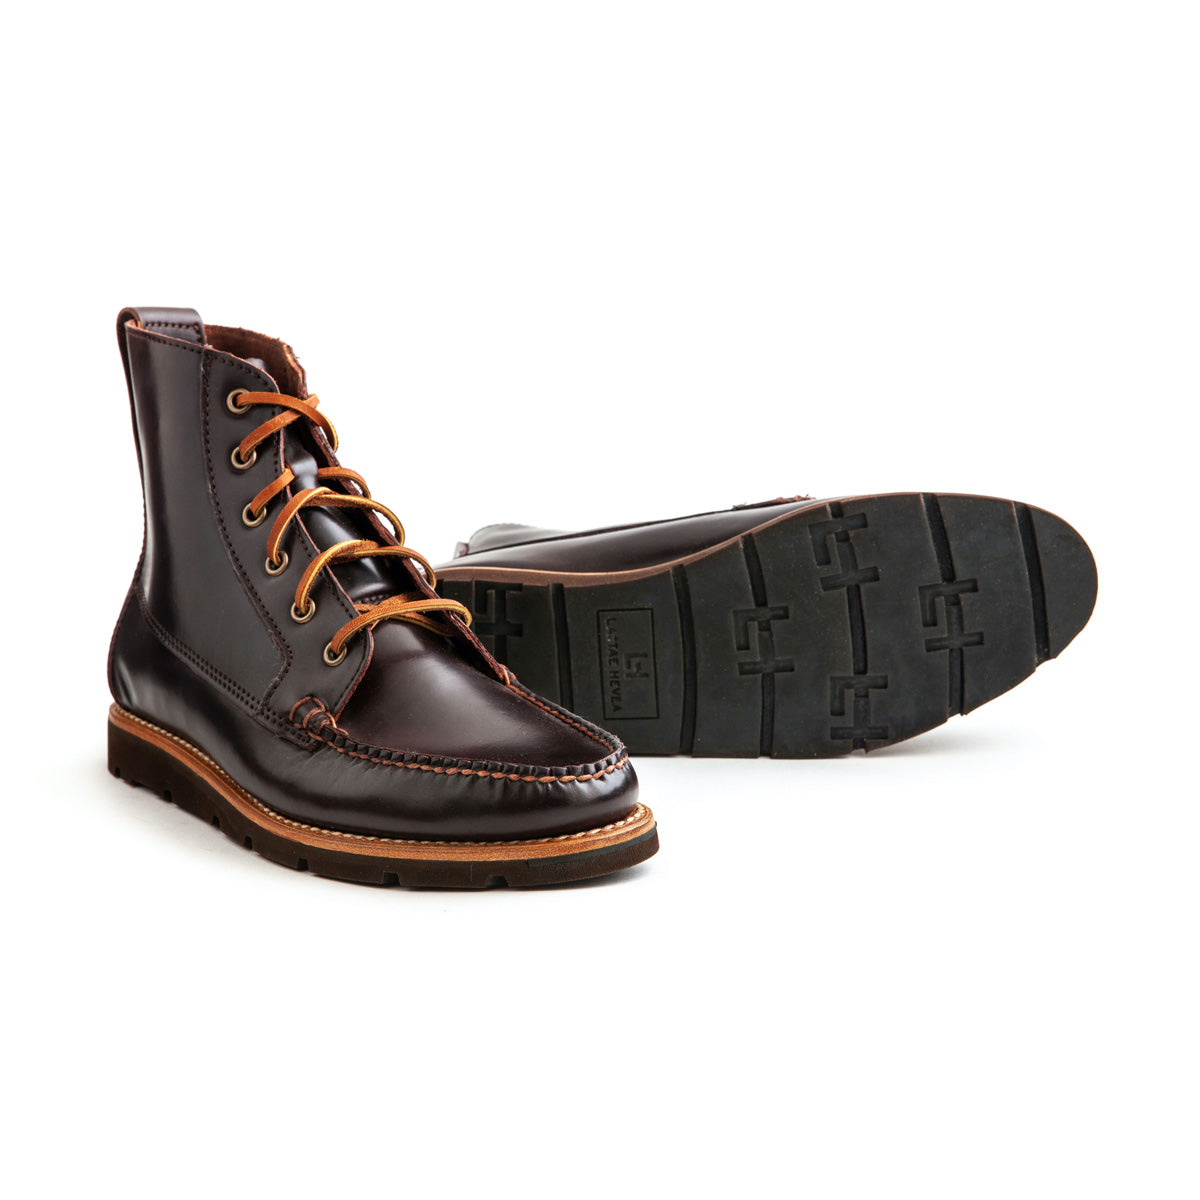 Shell Cordovan Baxter Boot for Leffot NYC